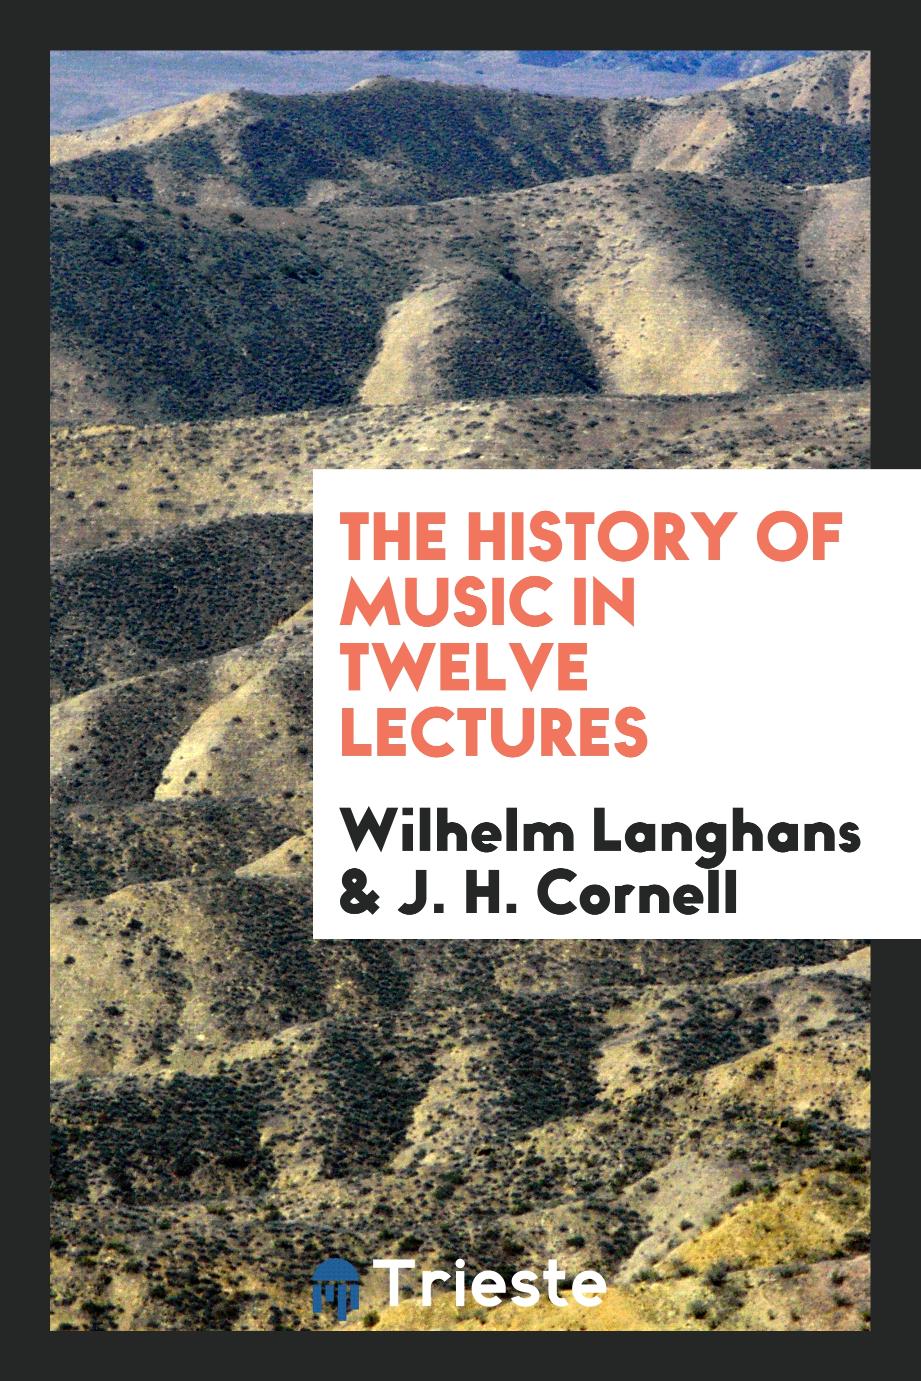 The history of music in twelve lectures